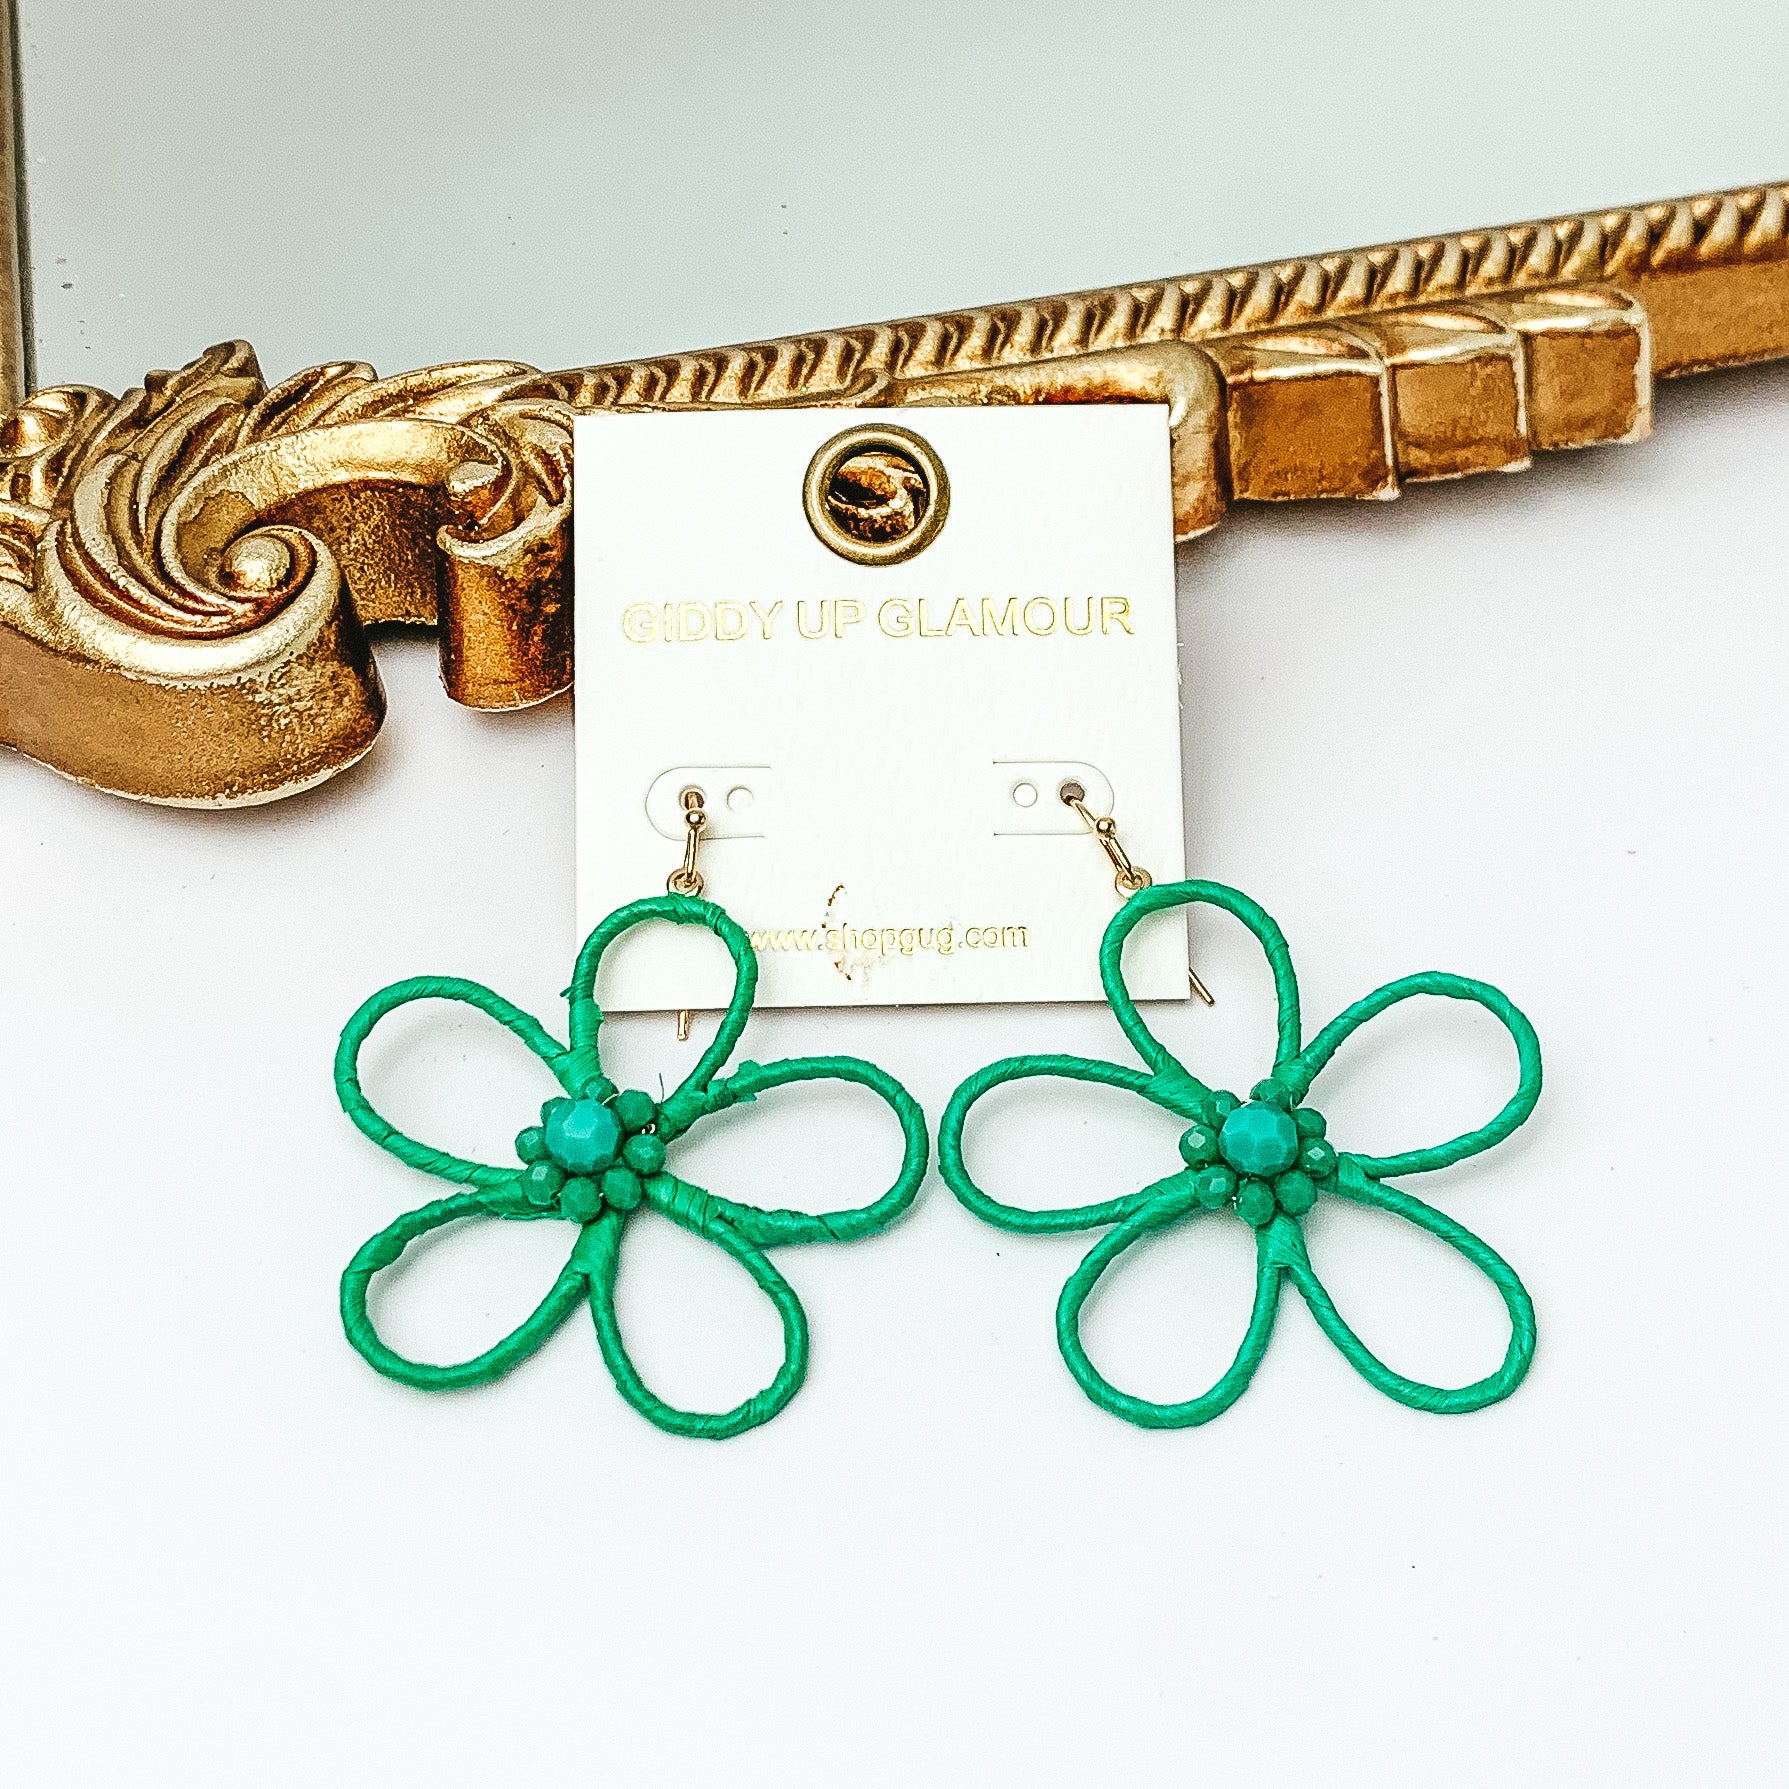 Daisy Delight Raffia Wrapped Flower Earrings with Crystal Center in Kelly Green - Giddy Up Glamour Boutique